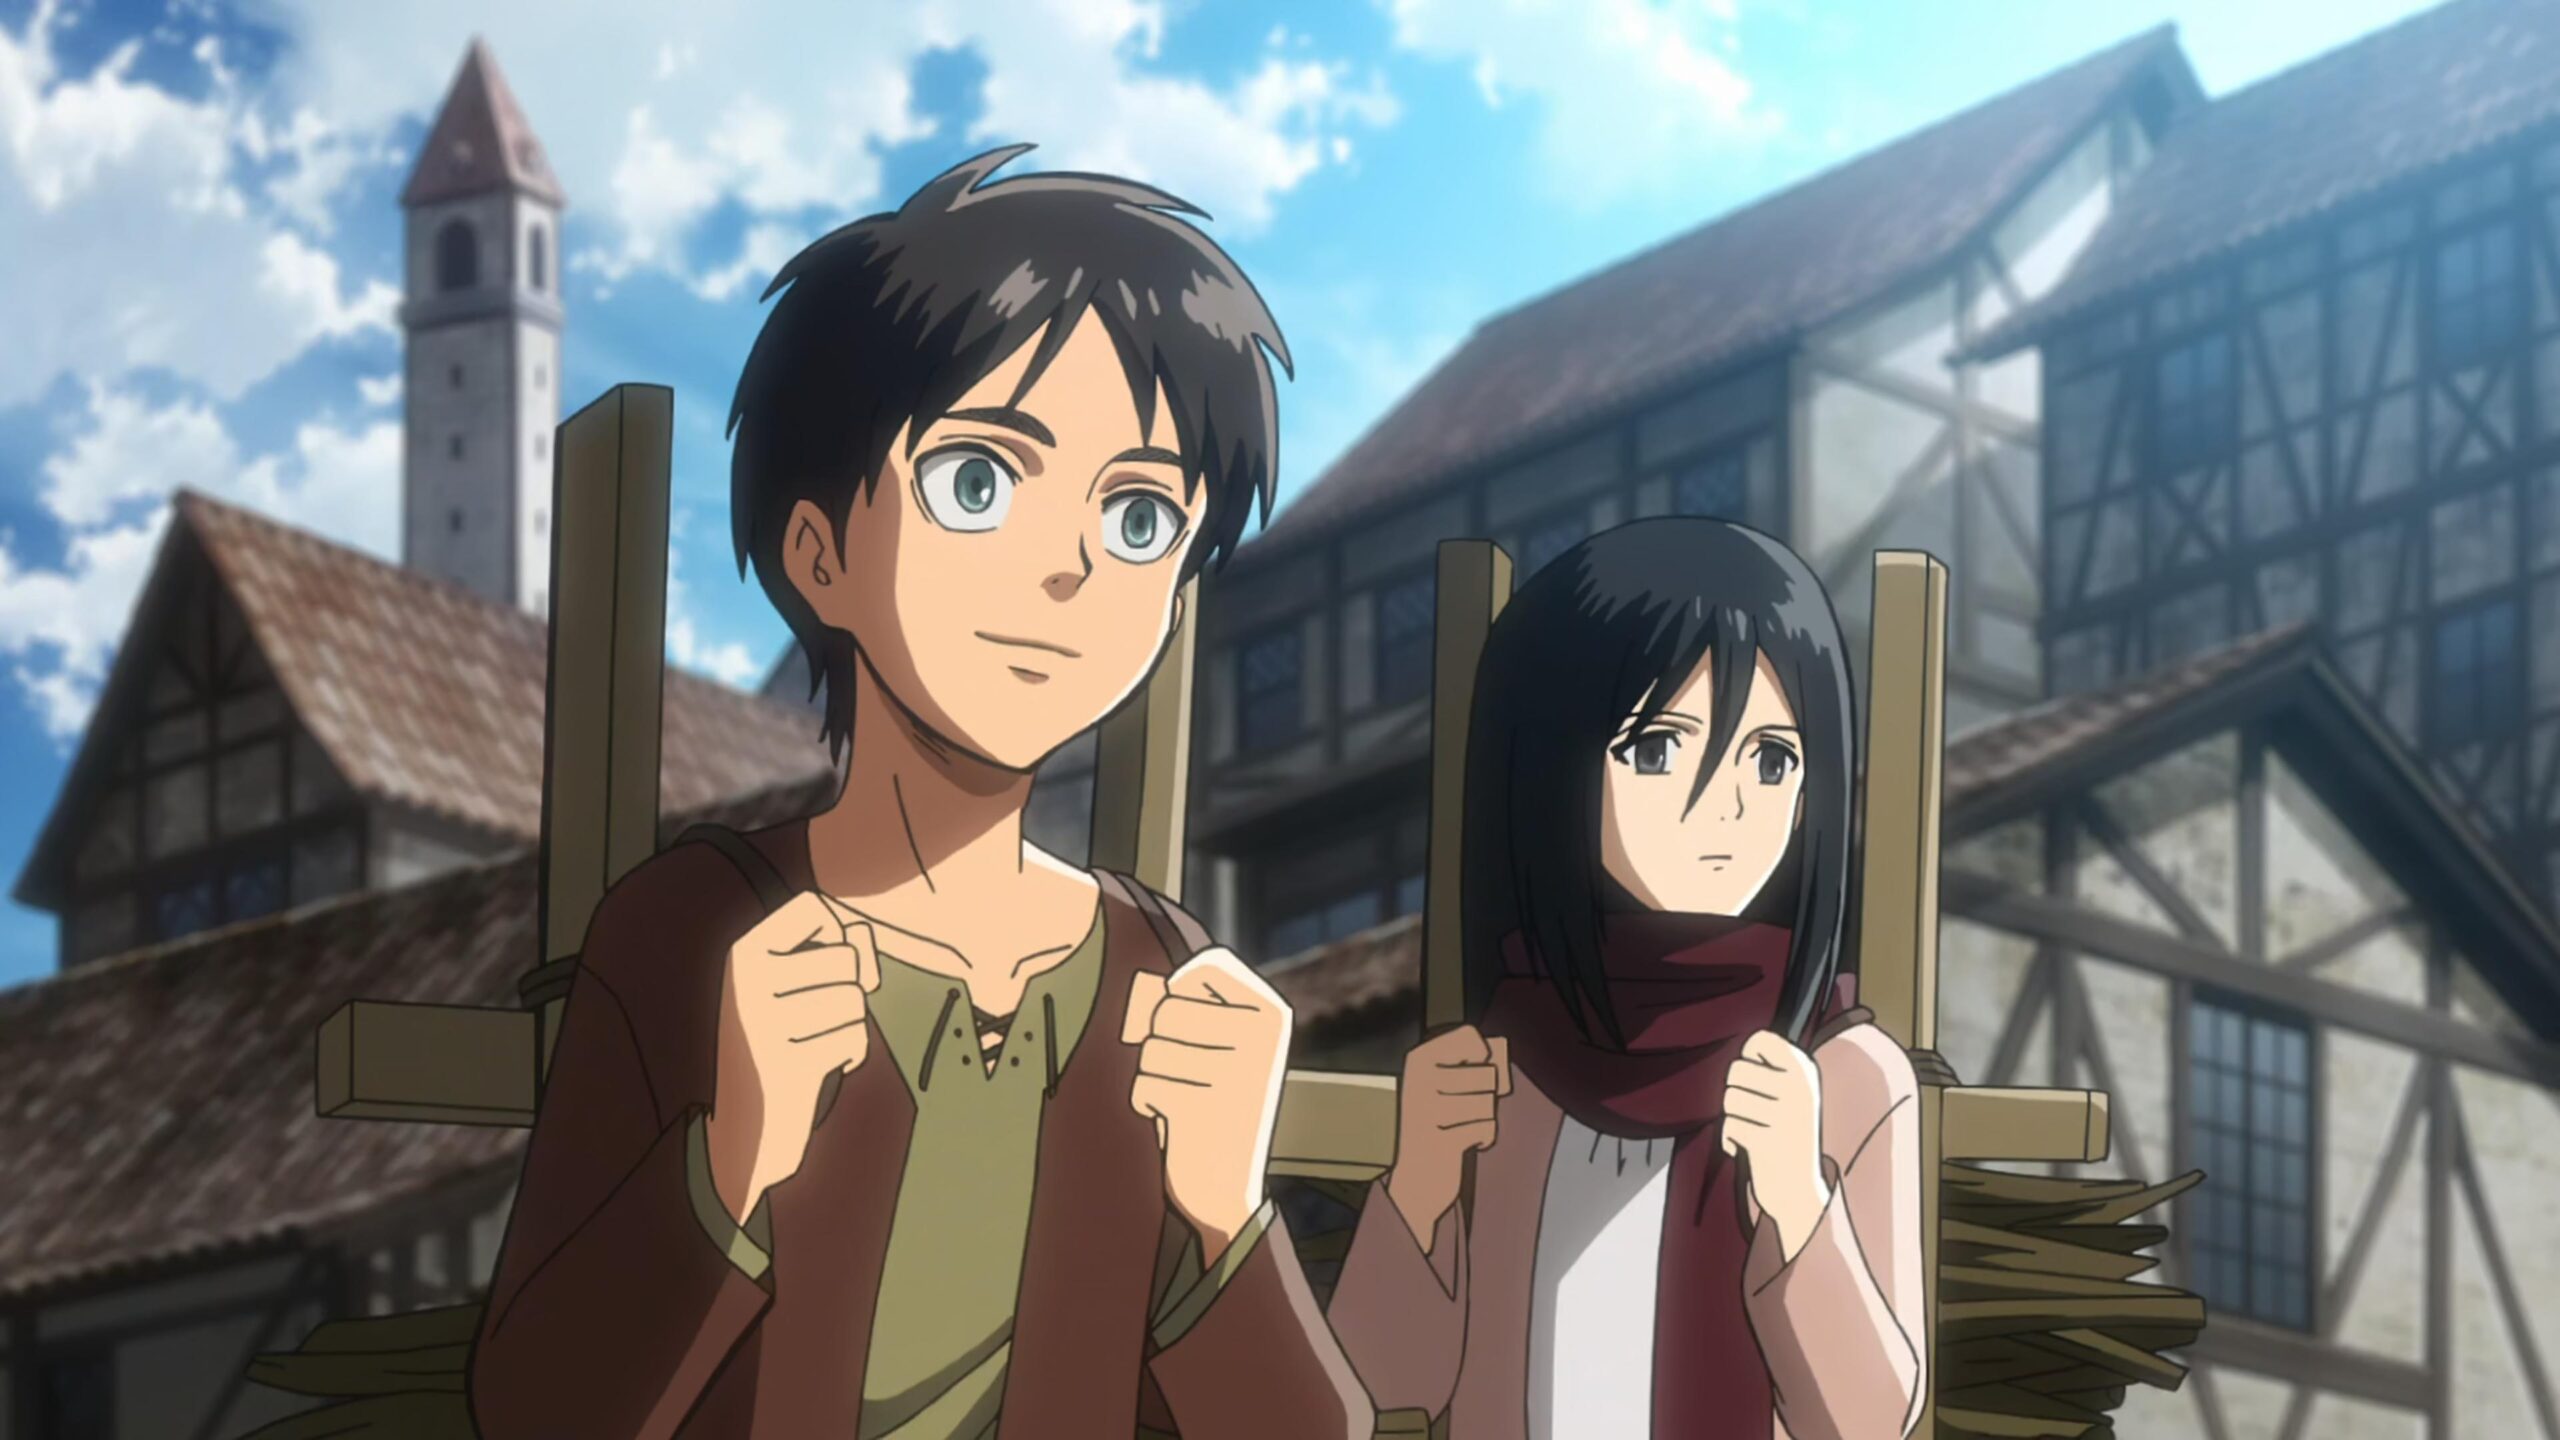 Boy and girl carry wood as they stare off into the distance. Season 1, Episode 1: "To You, In 2,000 Years: The Fall Of Shiganshina Part 1." Attack On Titian. Wit Studio. 2013-.